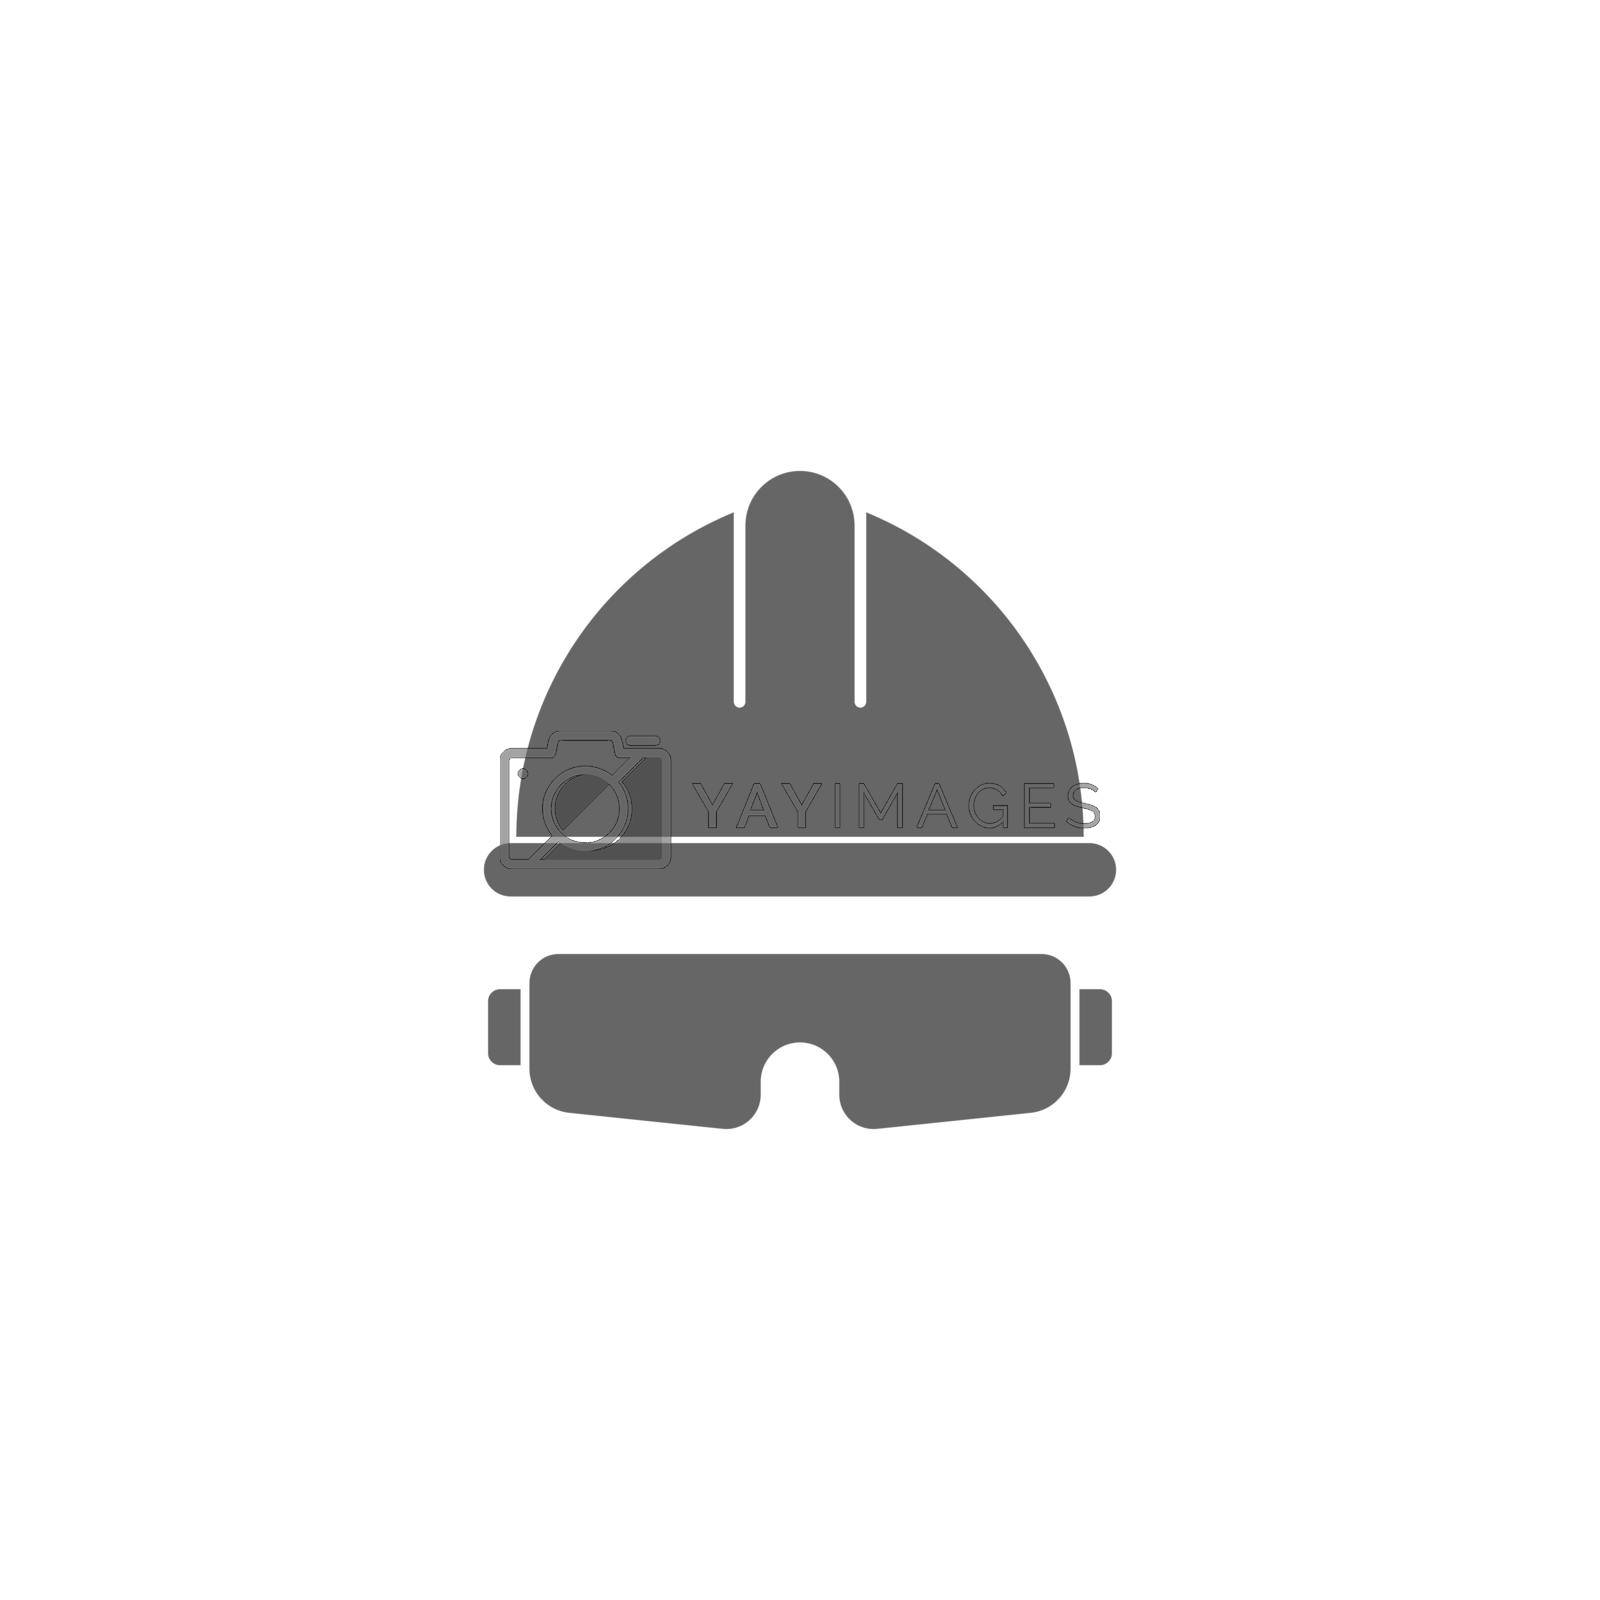 Royalty free image of Safety glasses construction icon design illustration by bellaxbudhong3